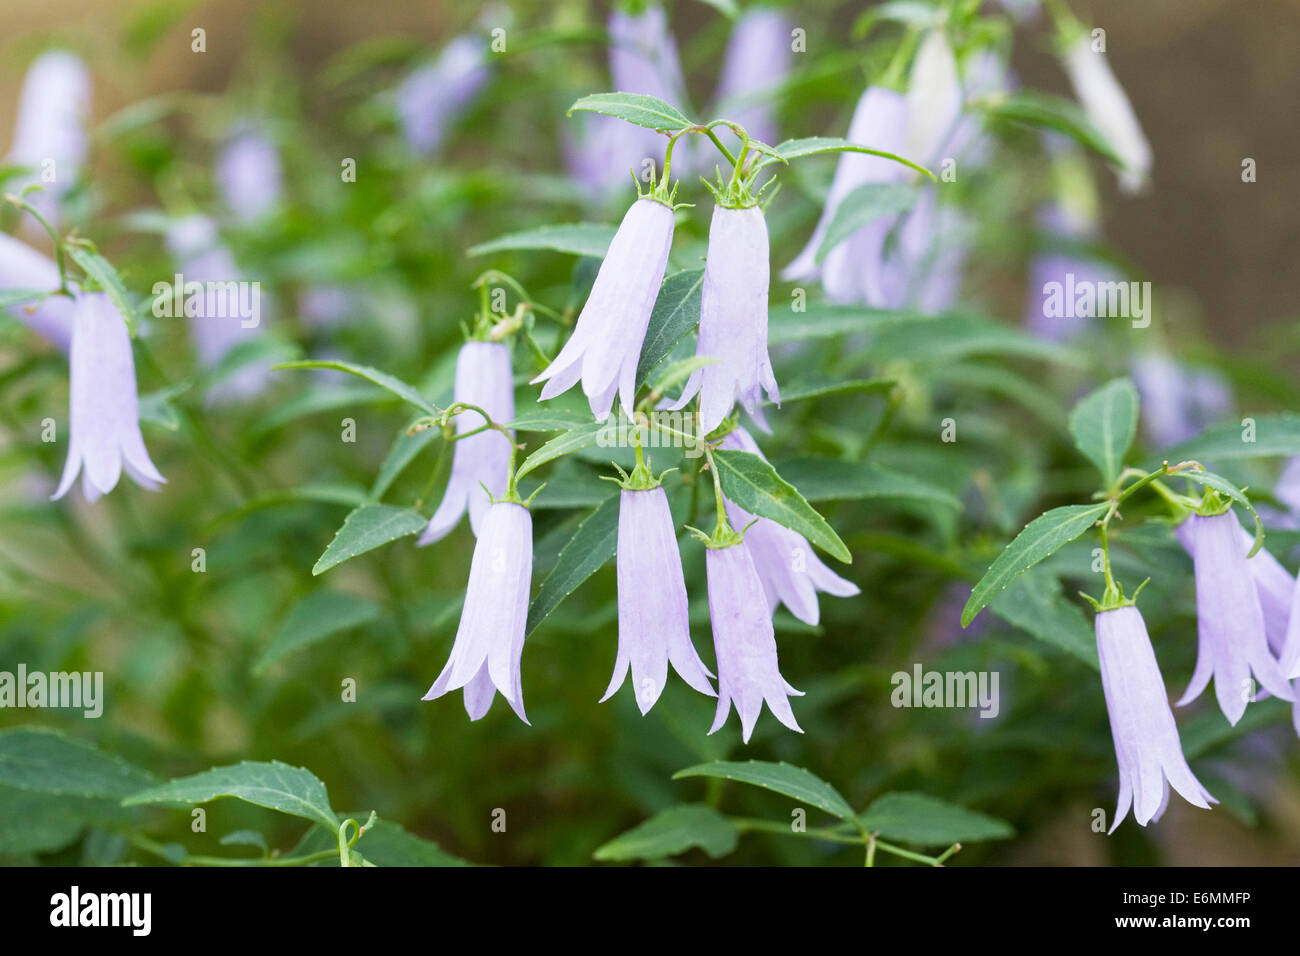 Small campanula growing in a protected environment. Stock Photo